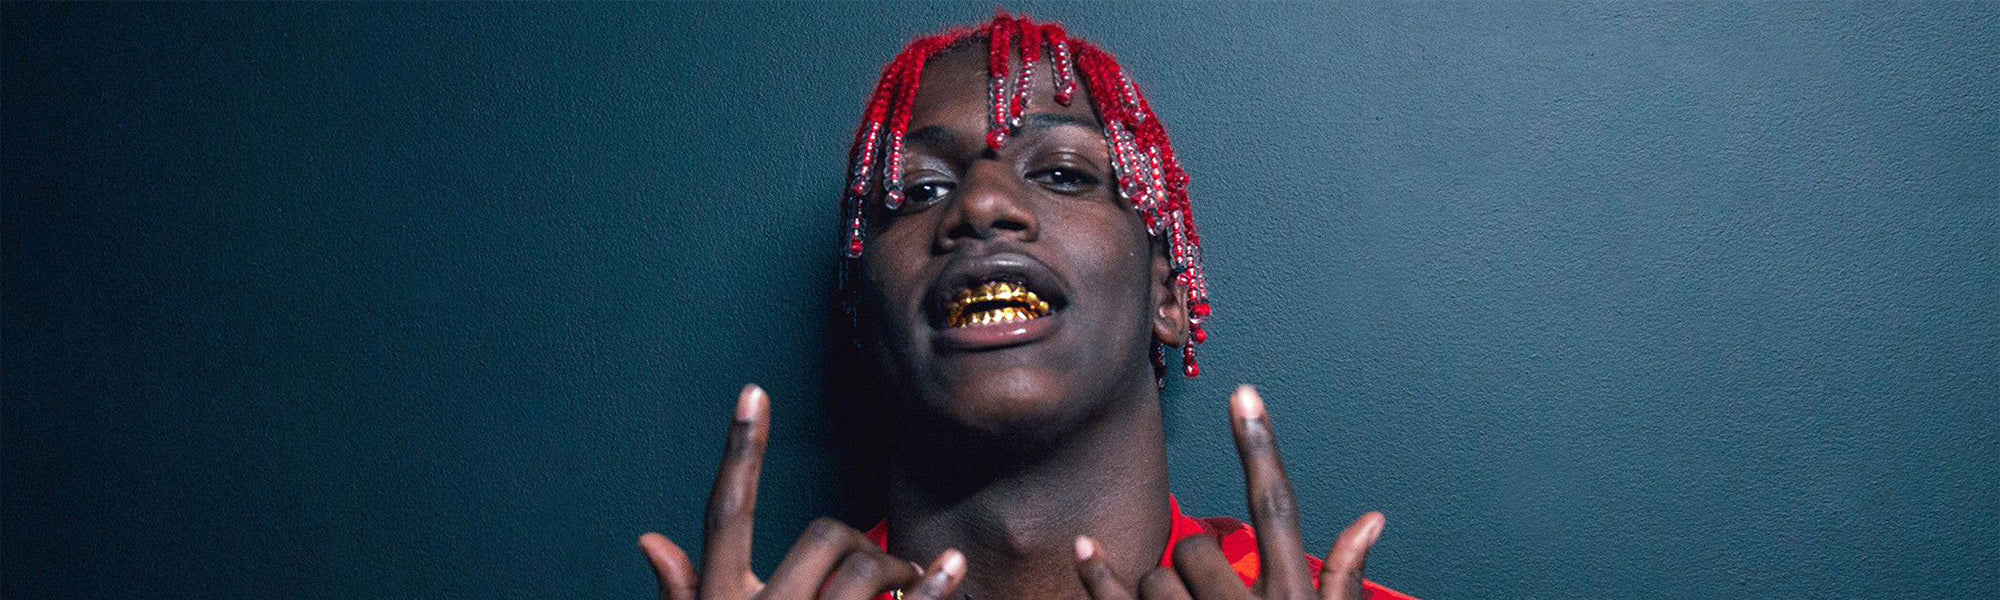 Lil Yachty Jewelry: How Much Is It Worth?